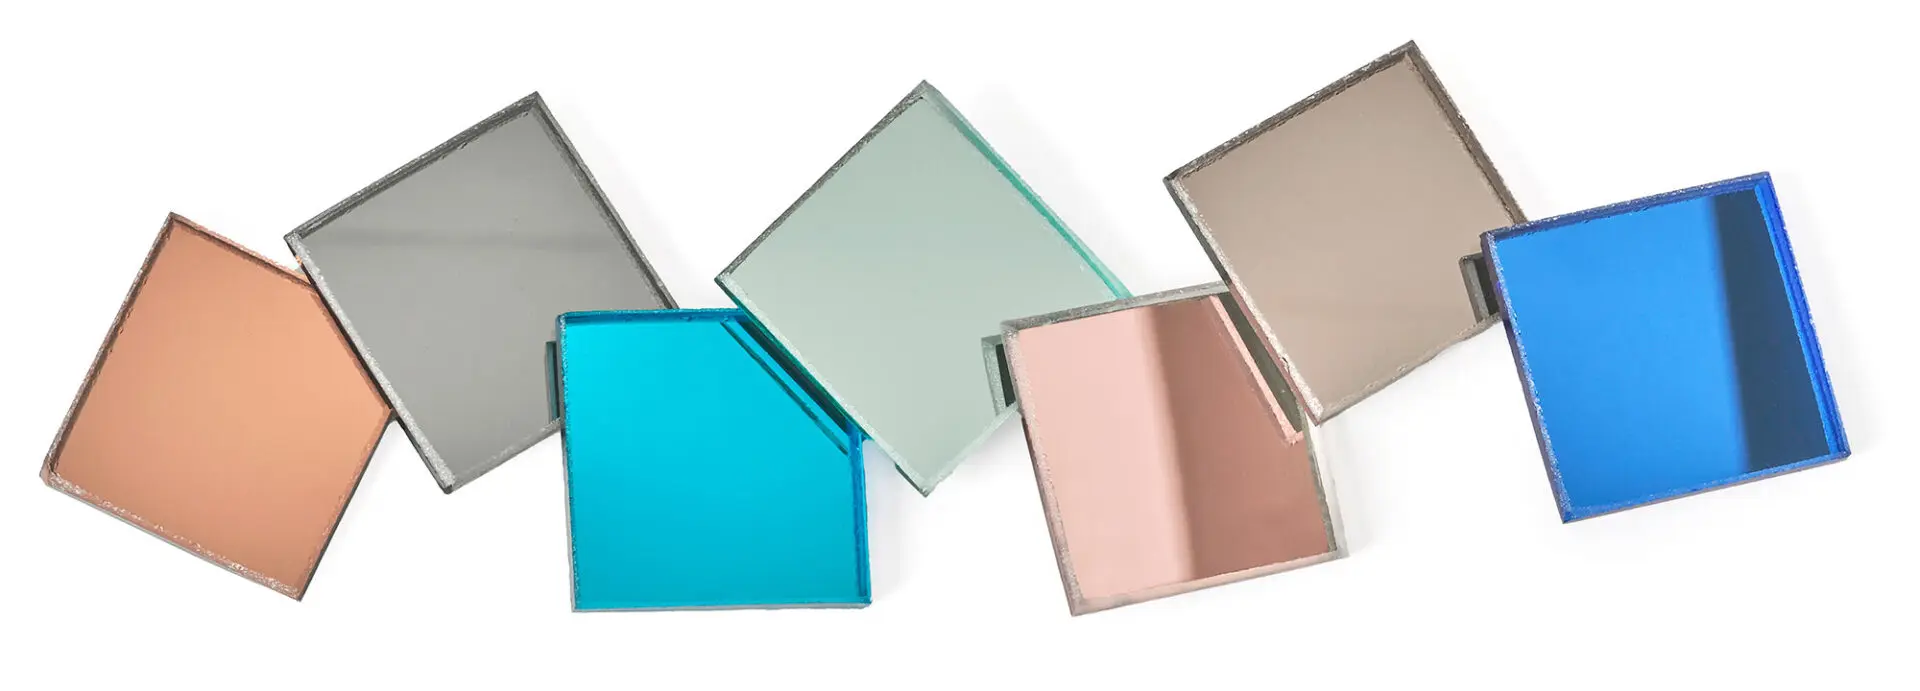 Mirrored glass color samples